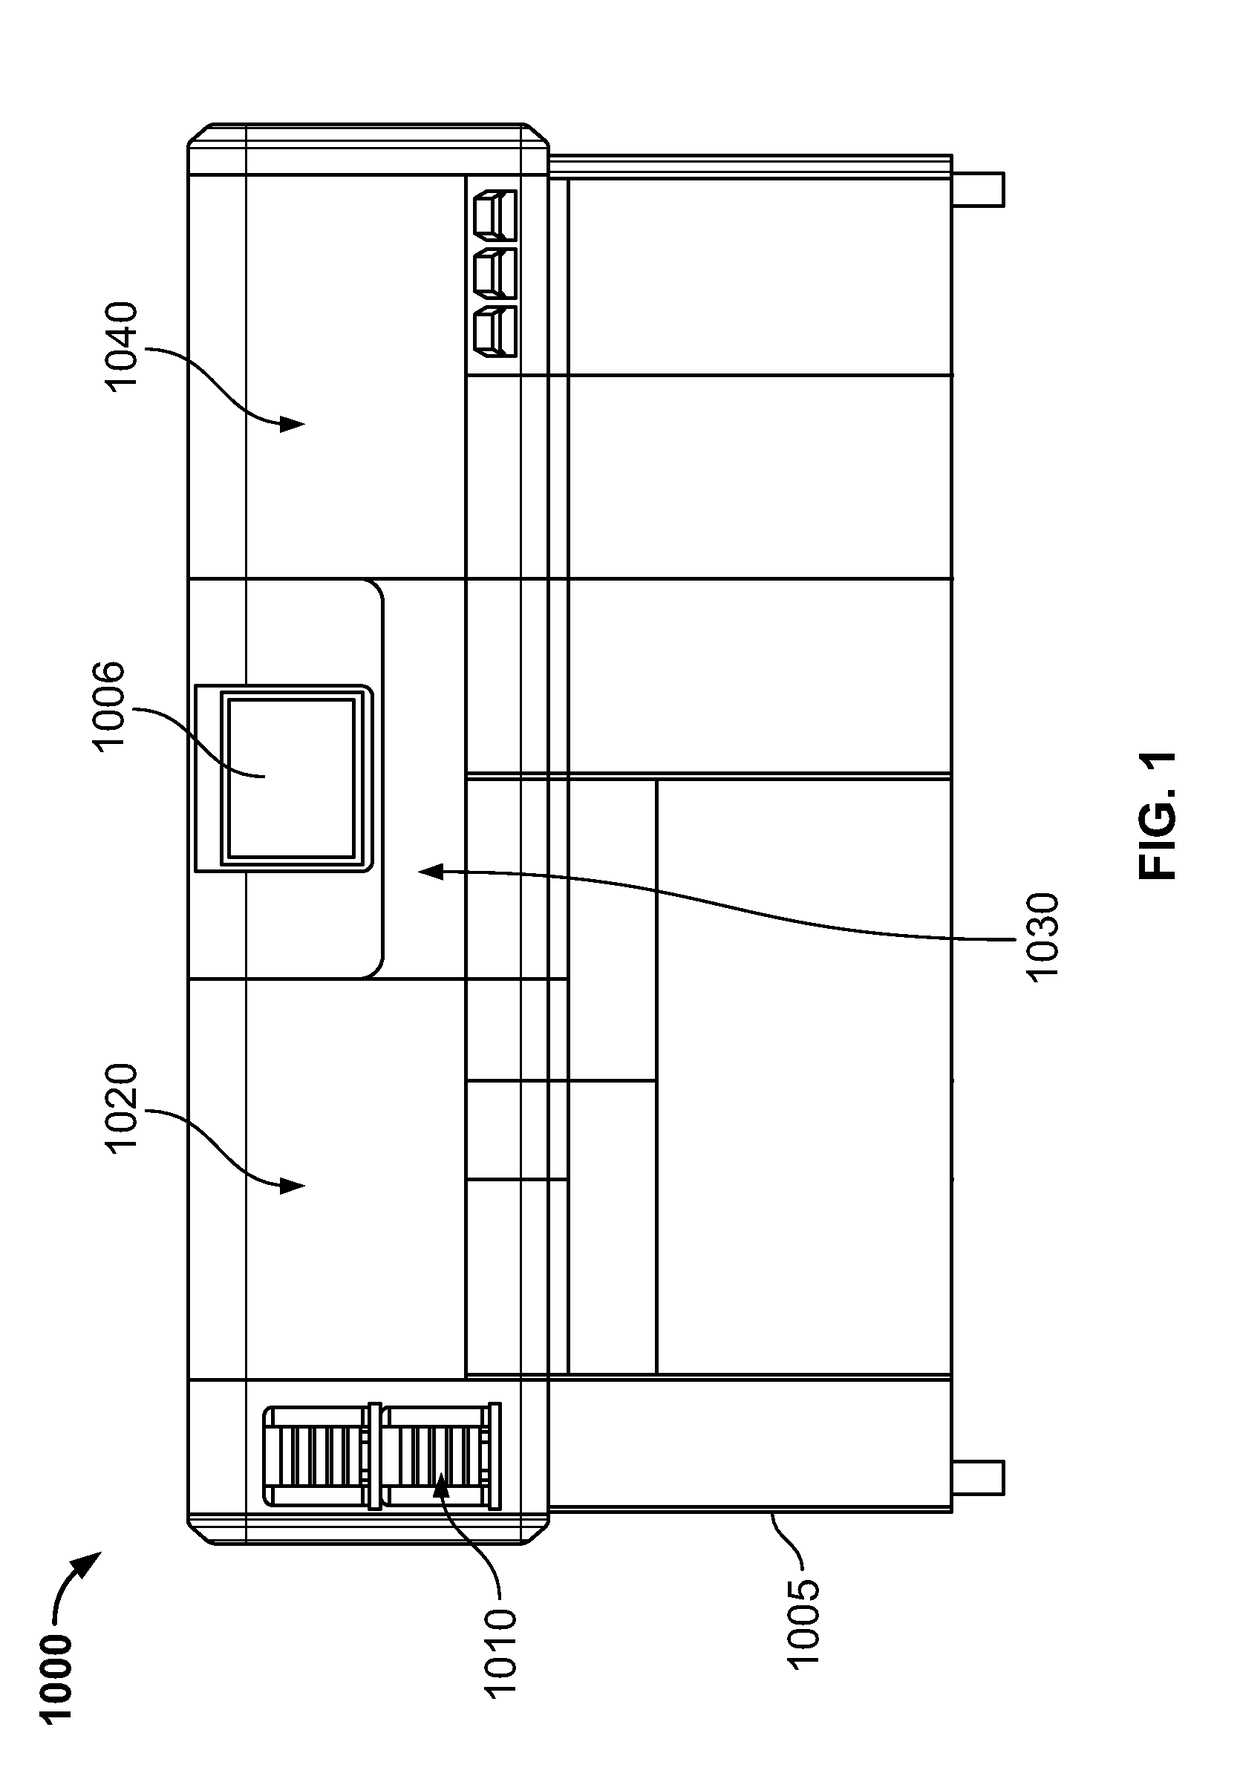 Automated method and system for obtaining and preparing microorganism sample for both identification and antibiotic susceptibility tests